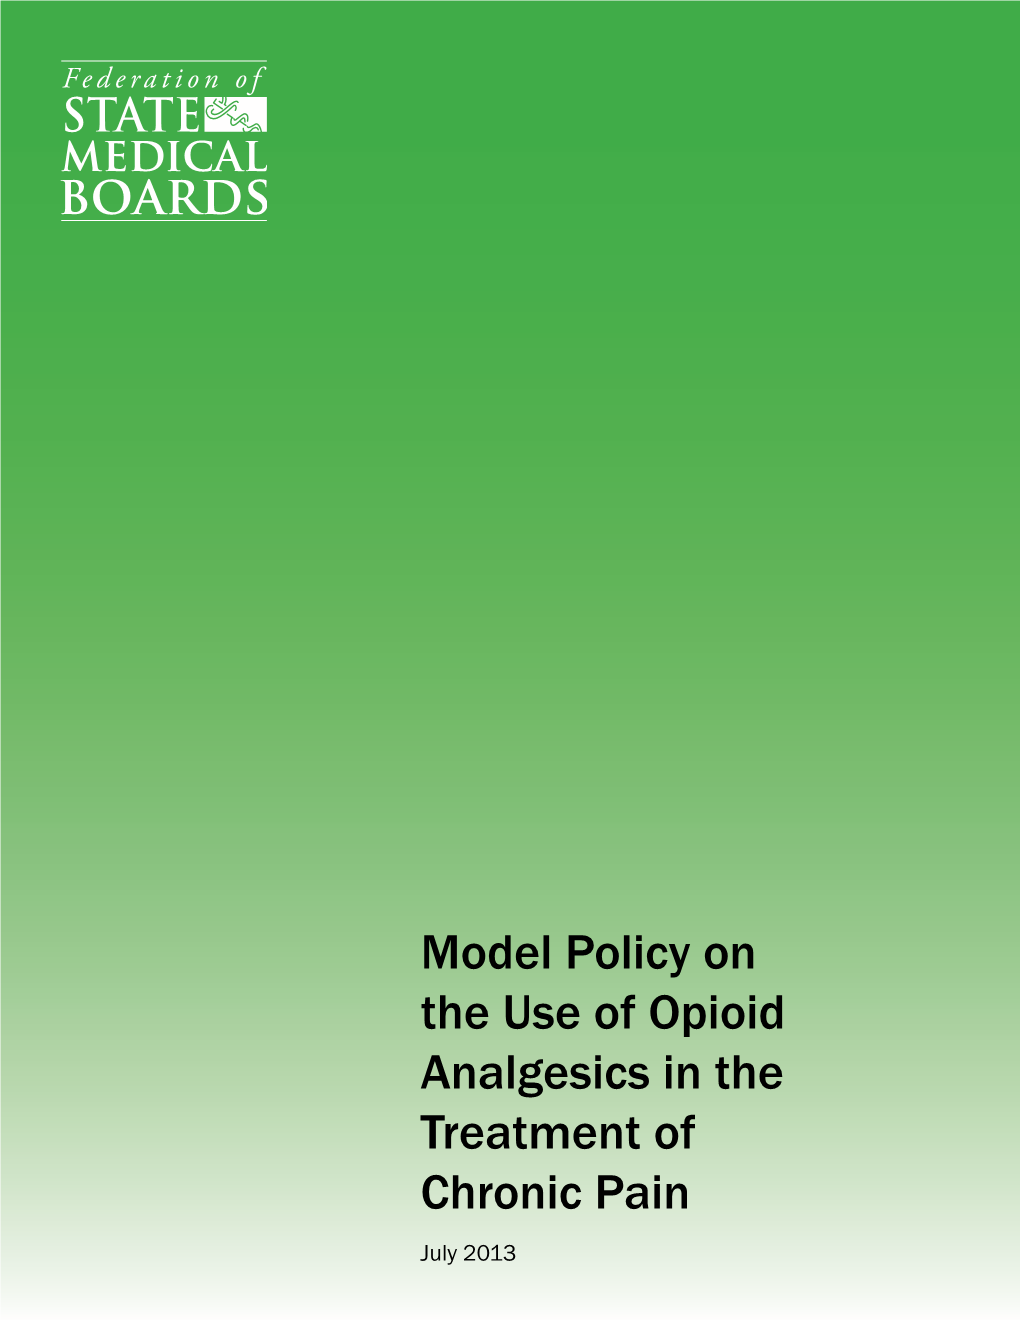 Model Policy for the Use of Opioid Analgesics in the Treatment of Chronic Pain